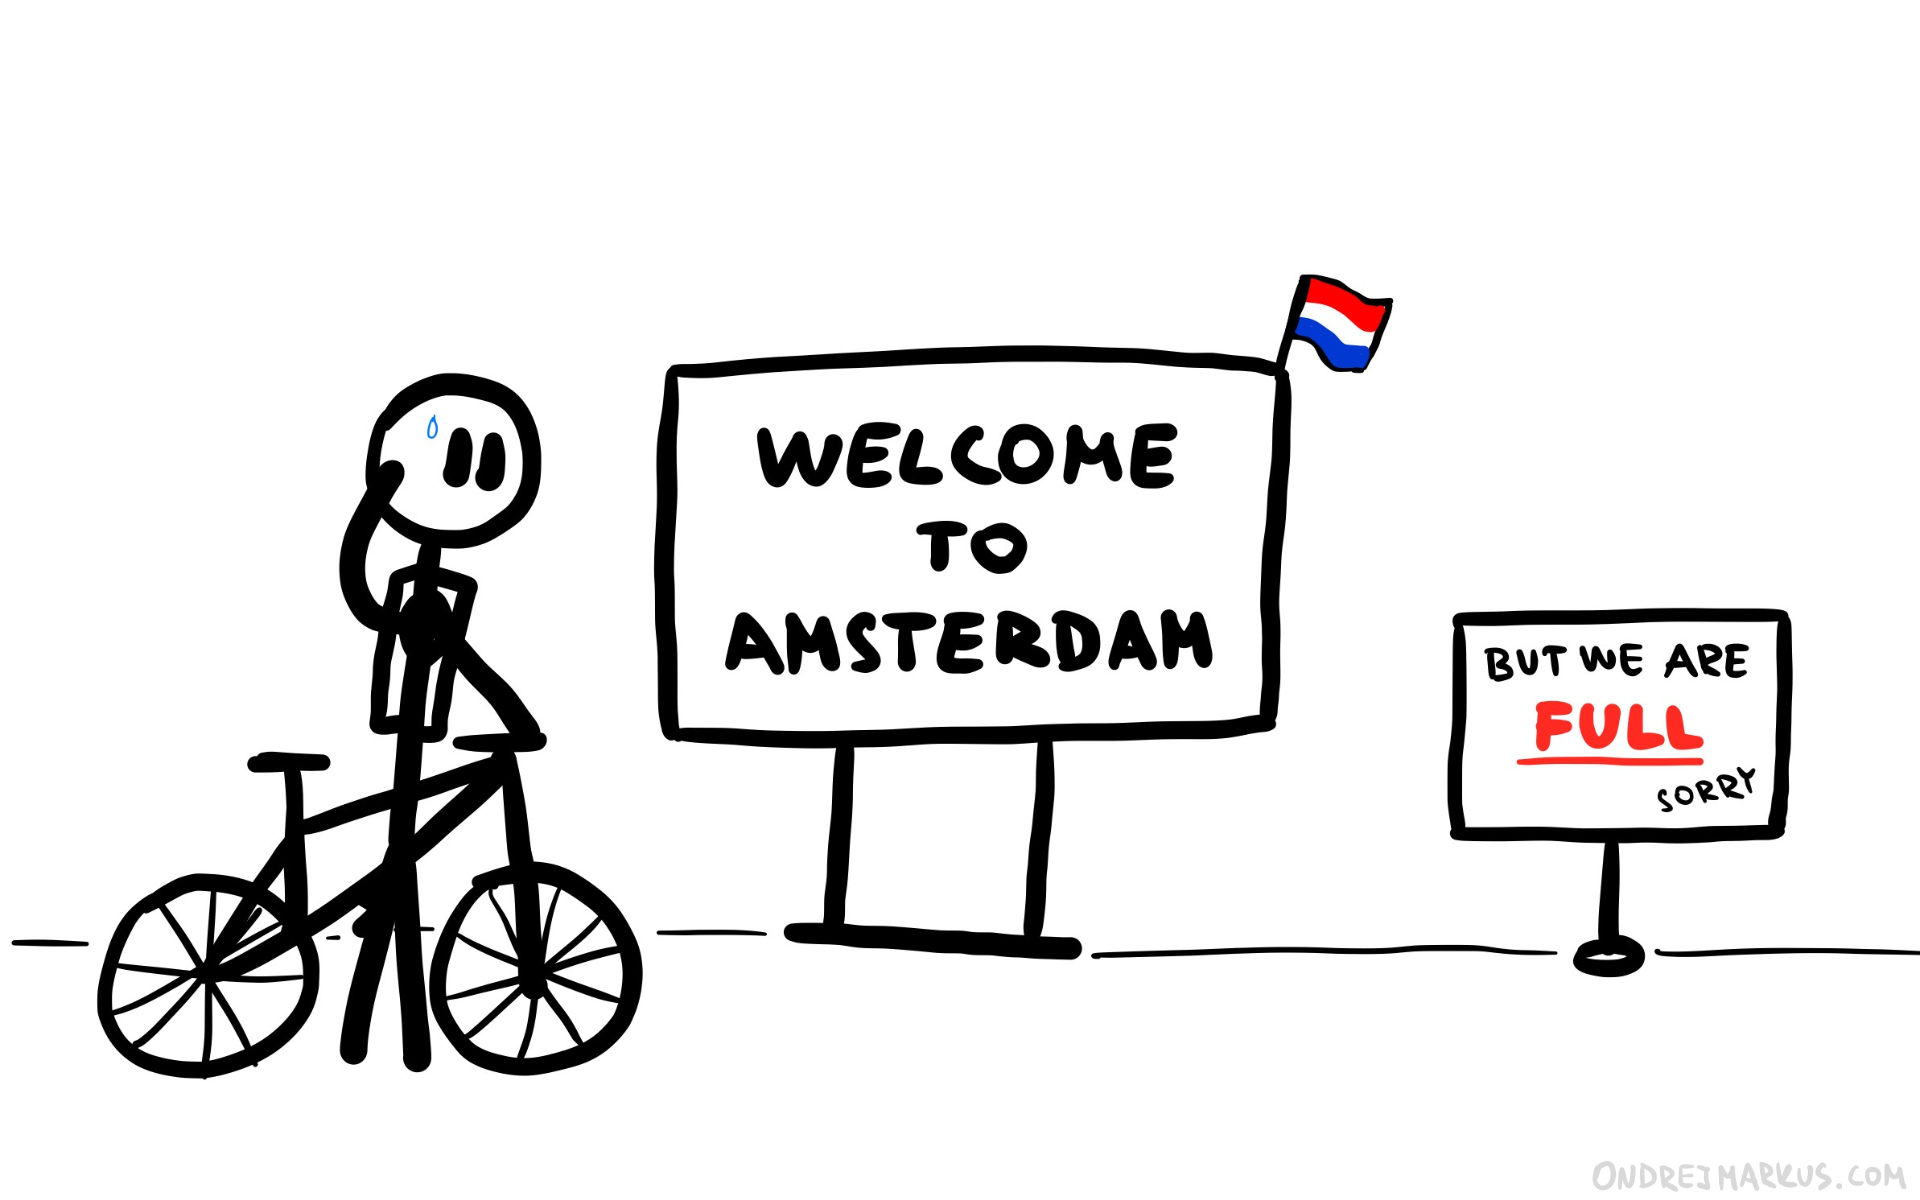 Moving to Amsterdam